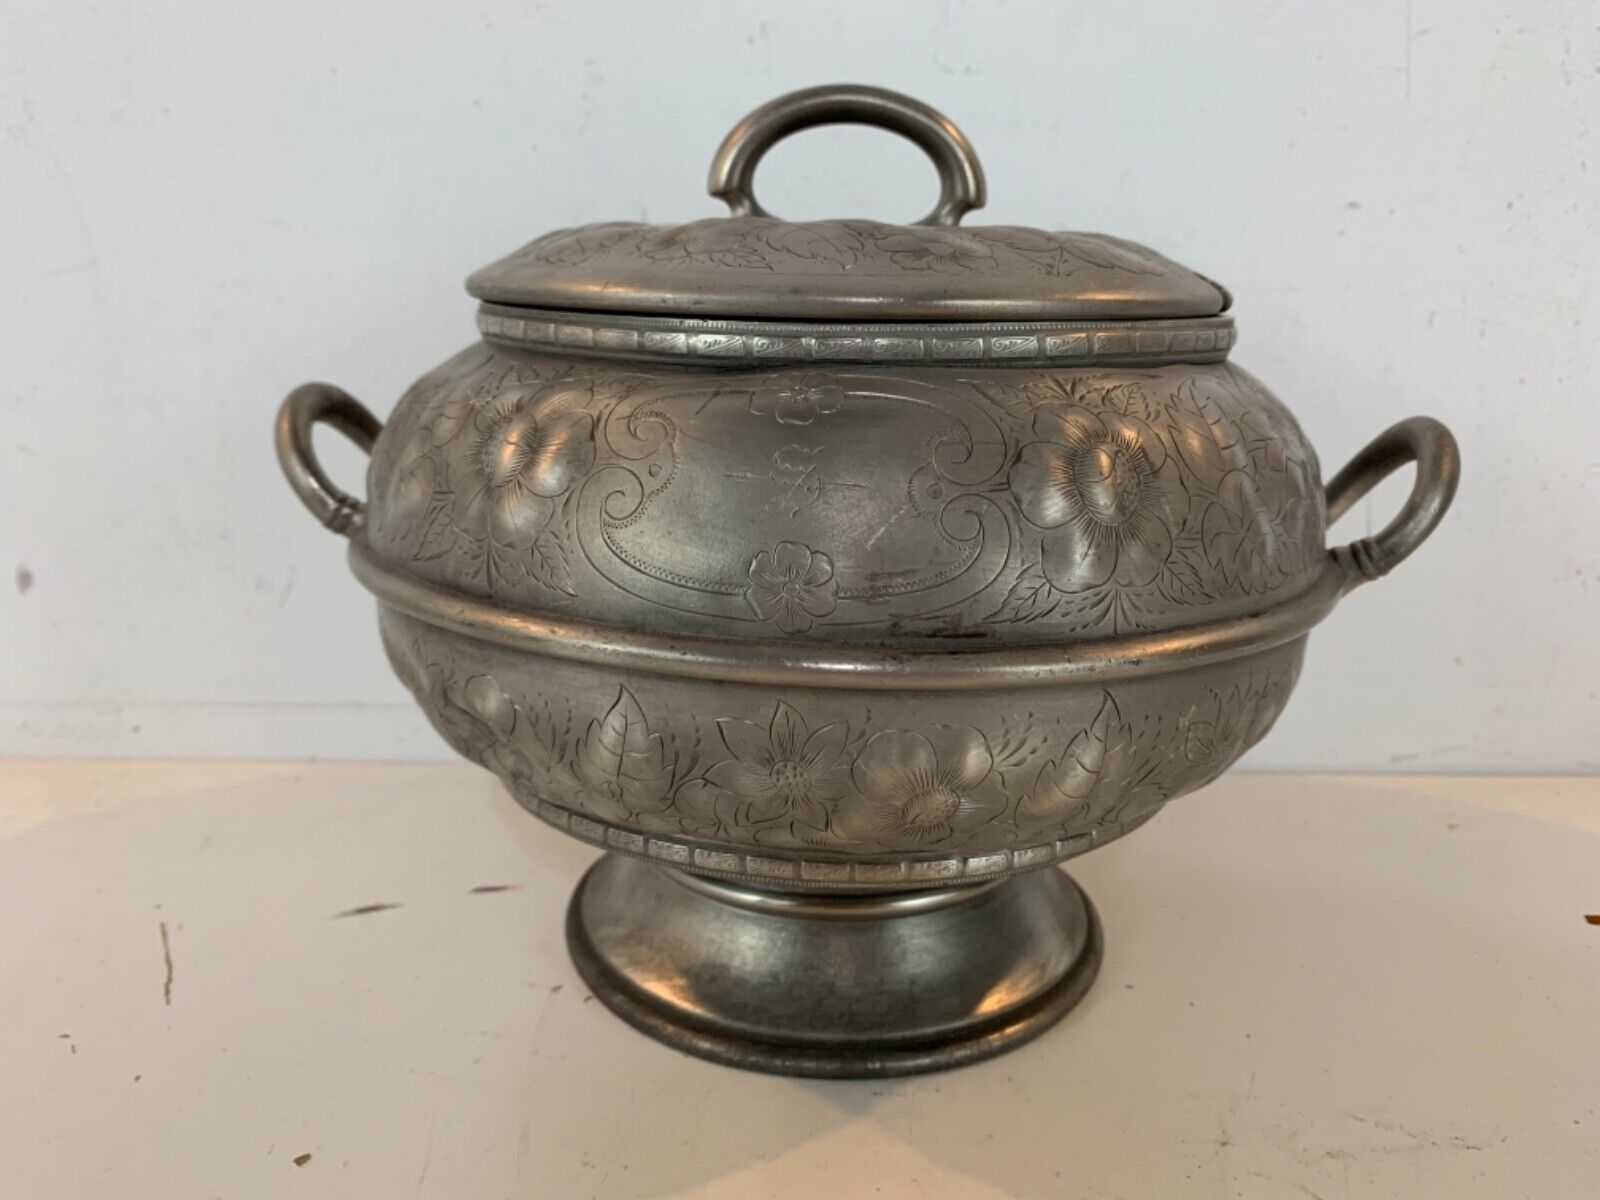 Vintage Silver plate Covered Serving Pot / Tureen with Floral Decorations